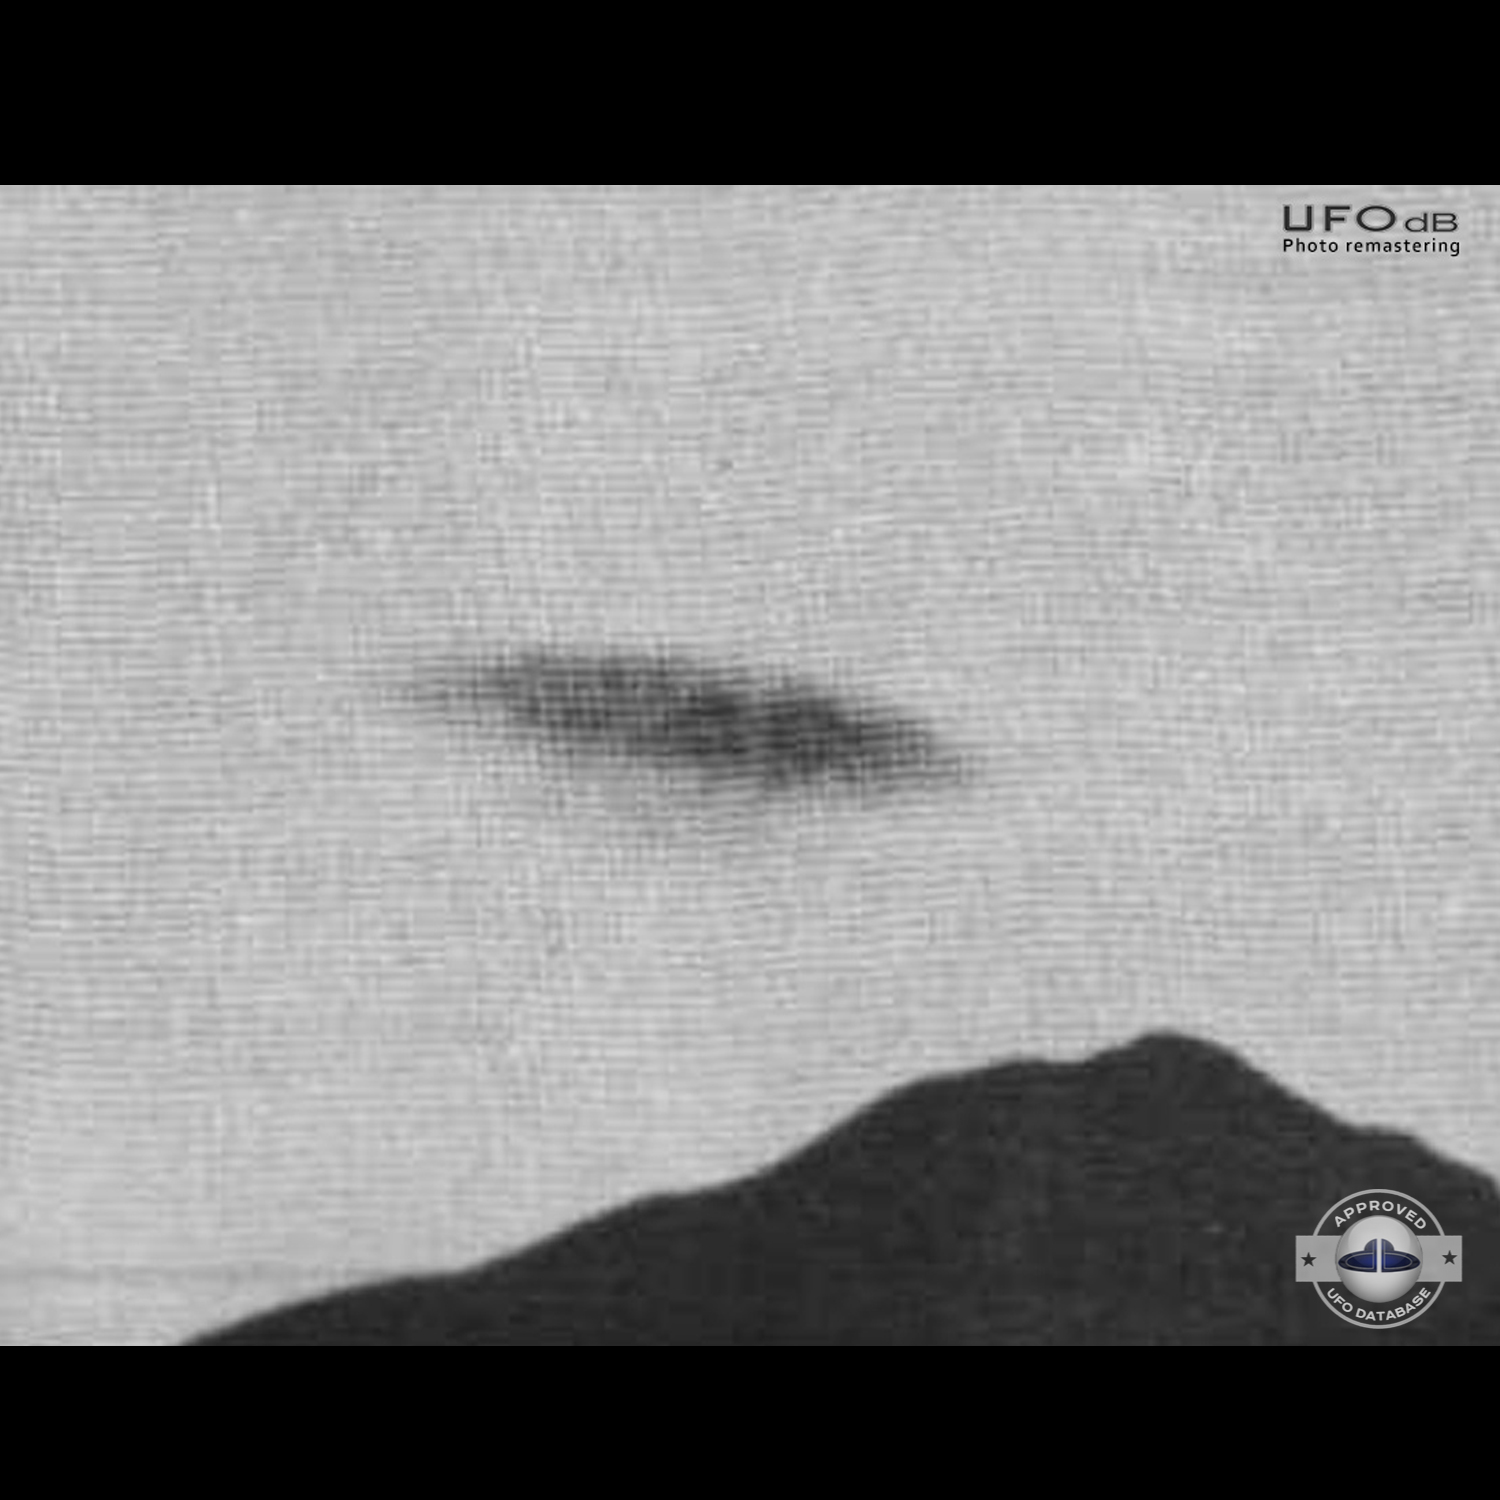 Old 1962 UFO picture coming from Argentina showing Saucer over hill UFO Picture #518-1